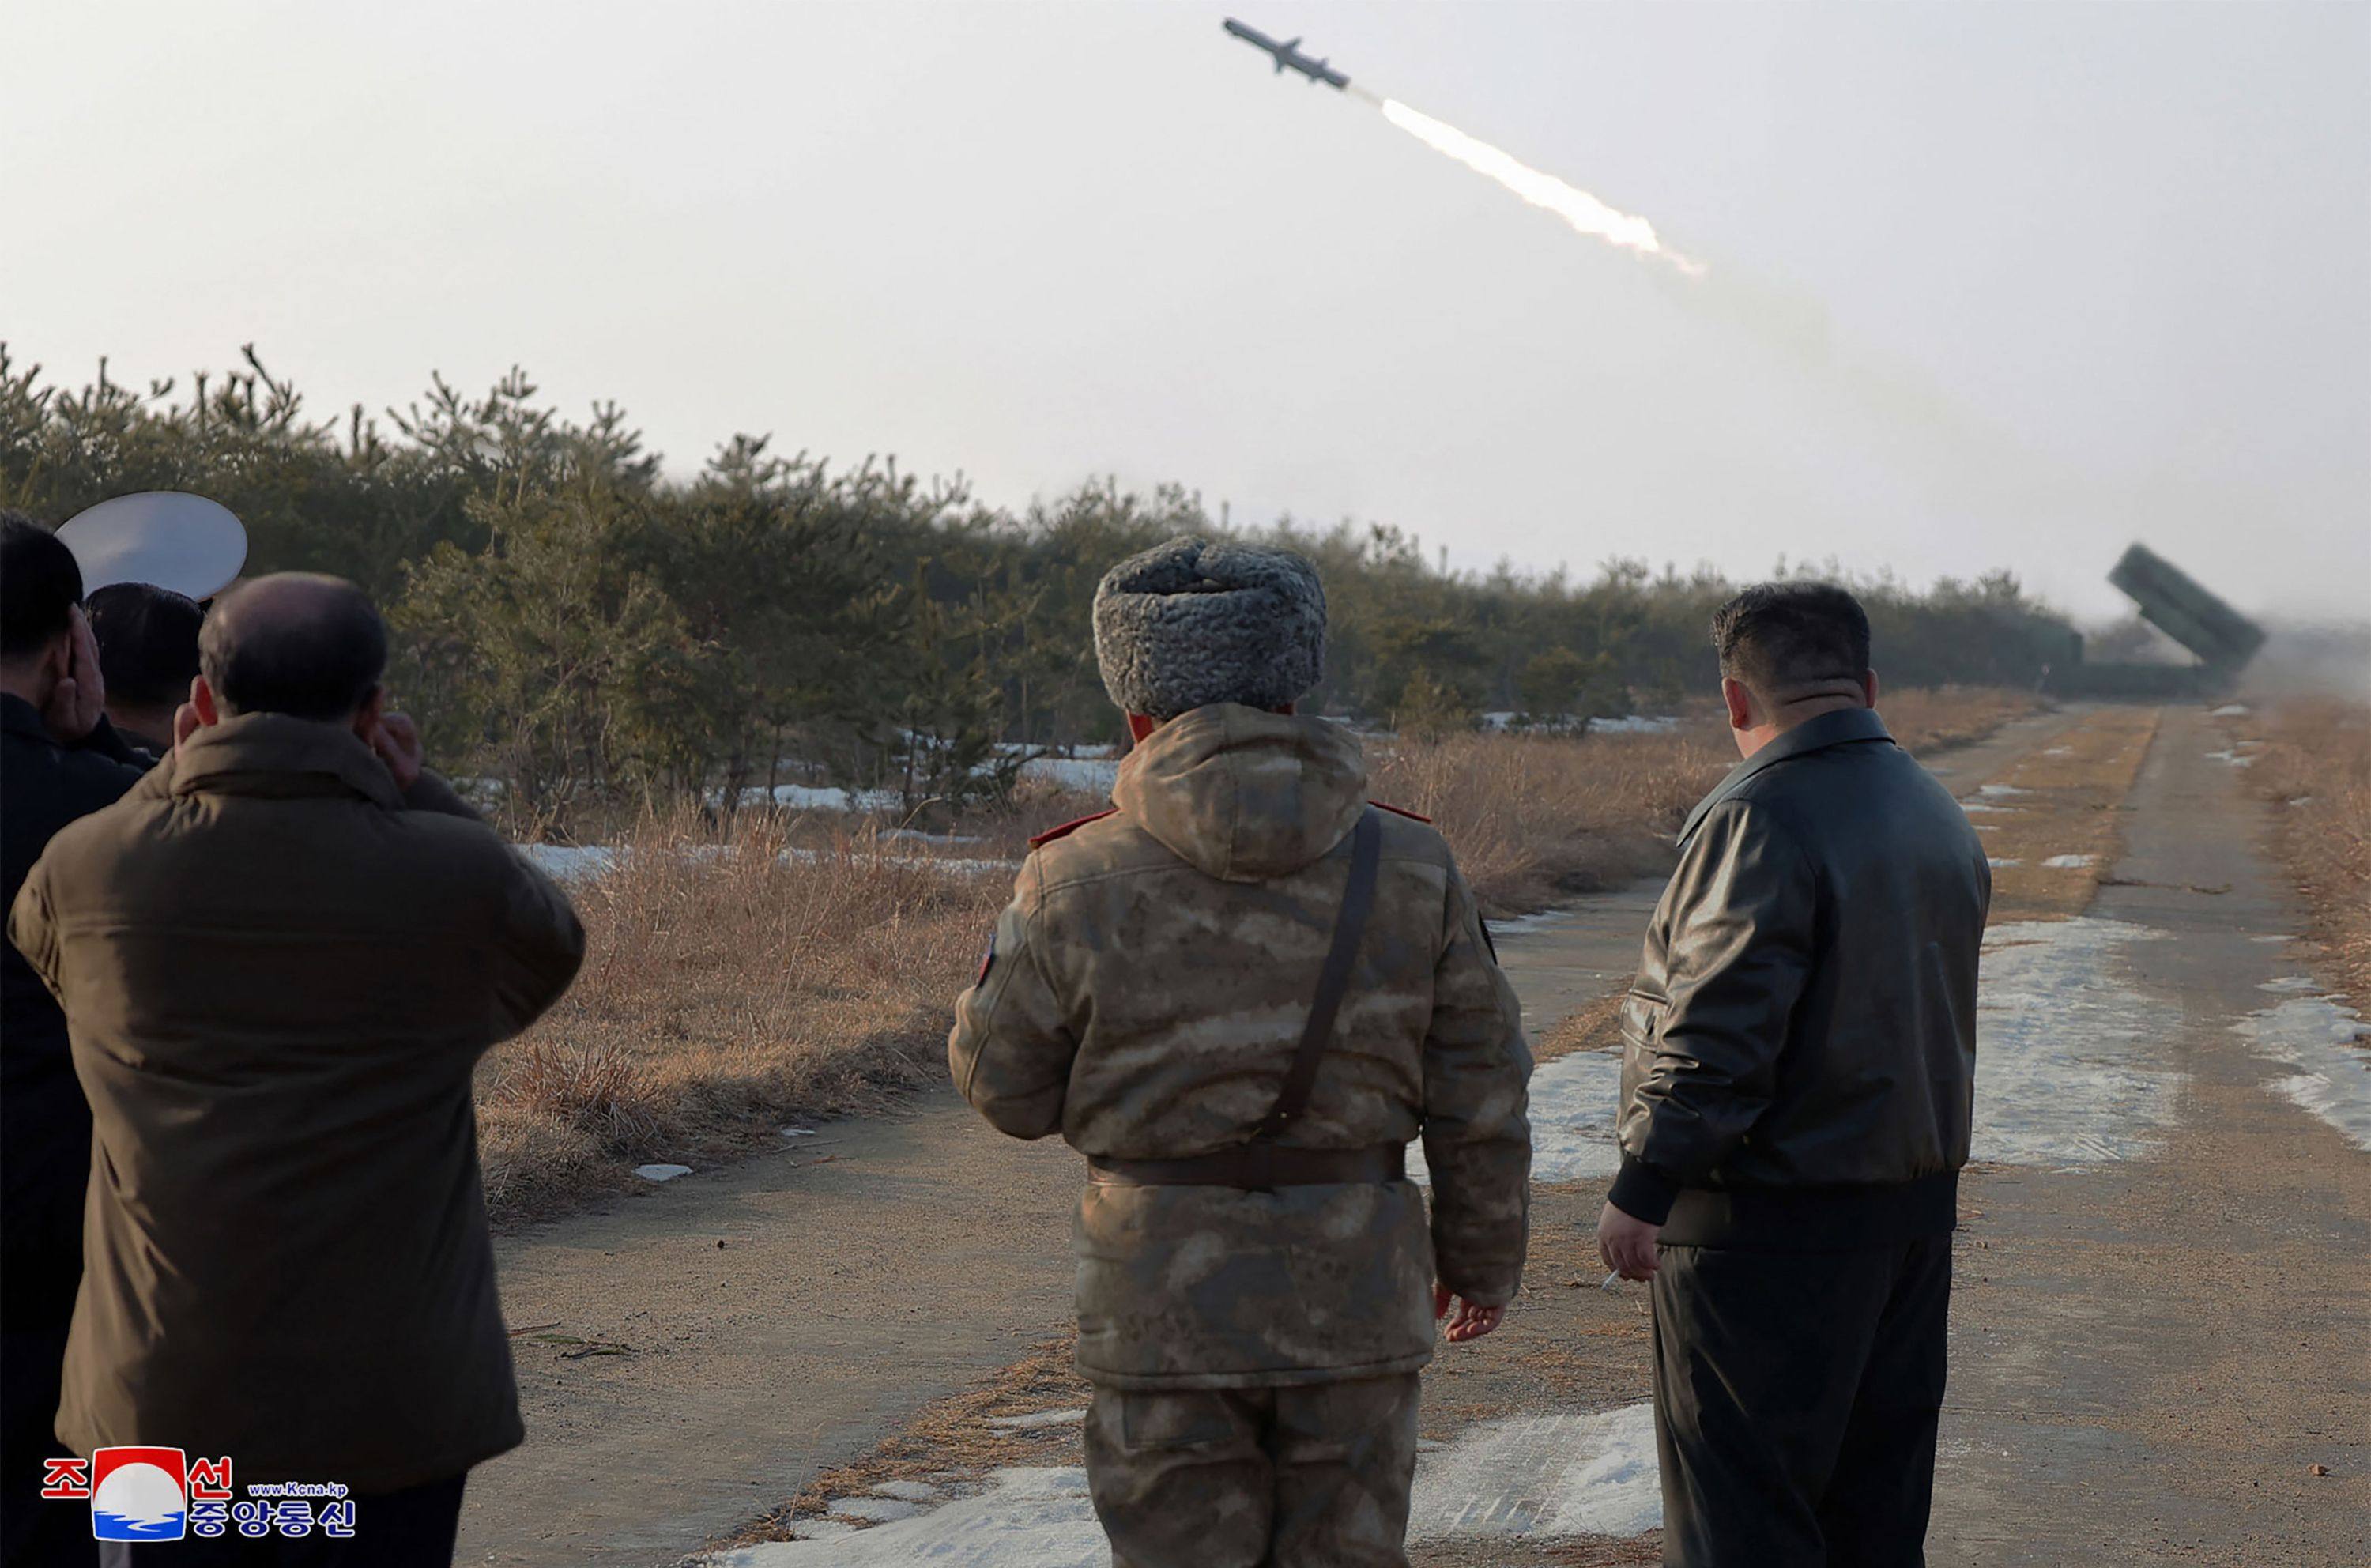 Kim Jong-un looks on during the test-fiiring of a new-type of surface-to-sea missile at an undisclosed location in North Korea on Wednesday. Photo: KCNA via KNS/AFP